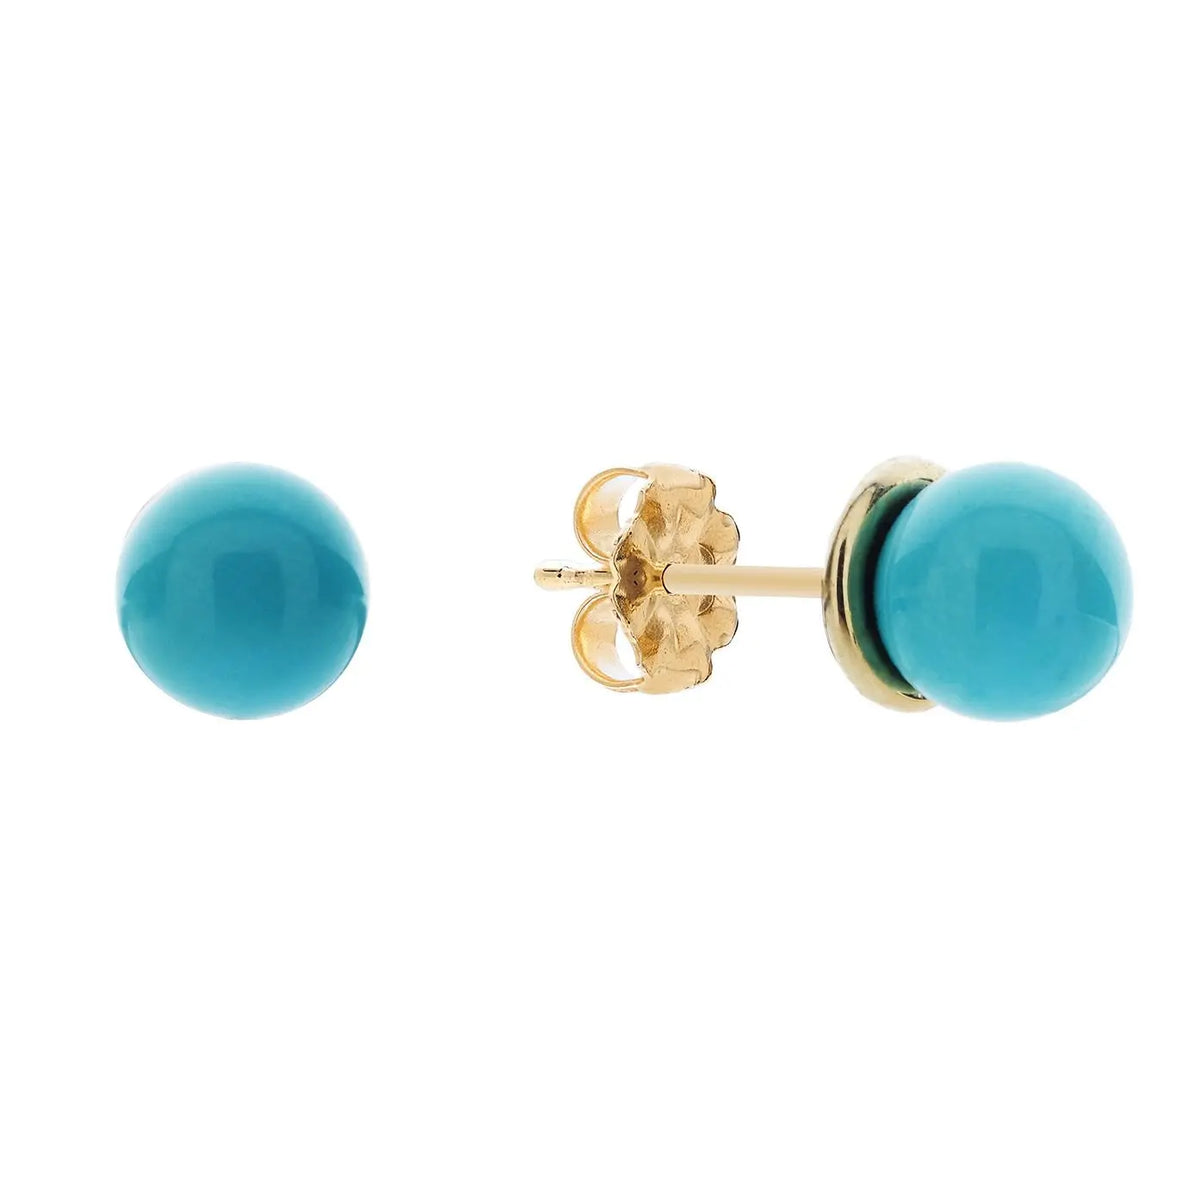 Floating Turquoise Stud Earrings - Squash Blossom Vail